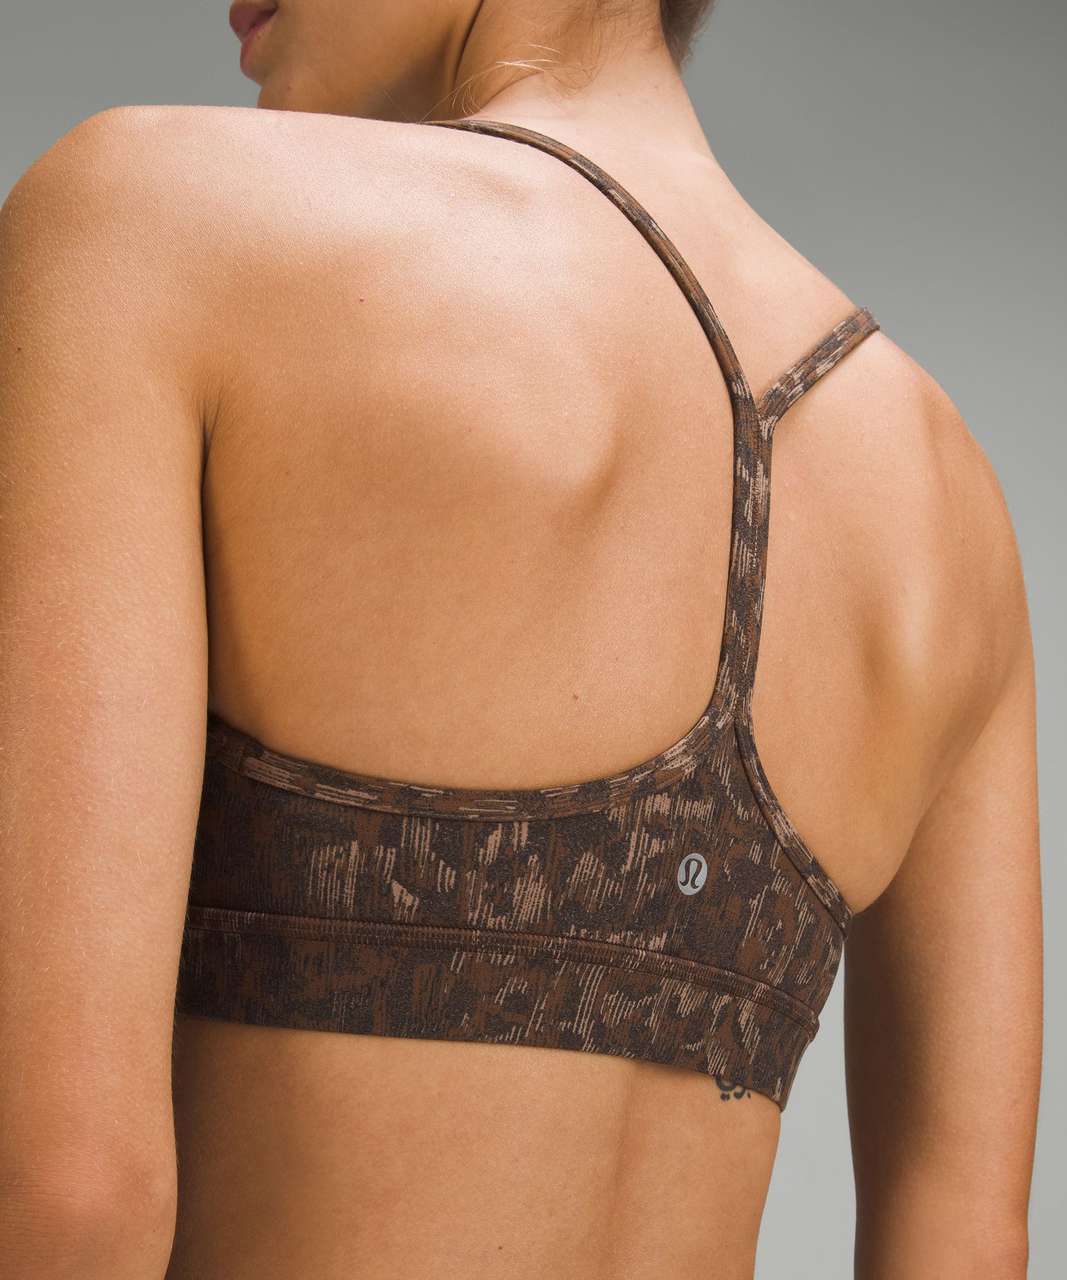 Lululemon Flow Y Nulu Bra *Light Support, A-C Cups - Lined Truleopard MAX Brown Multi